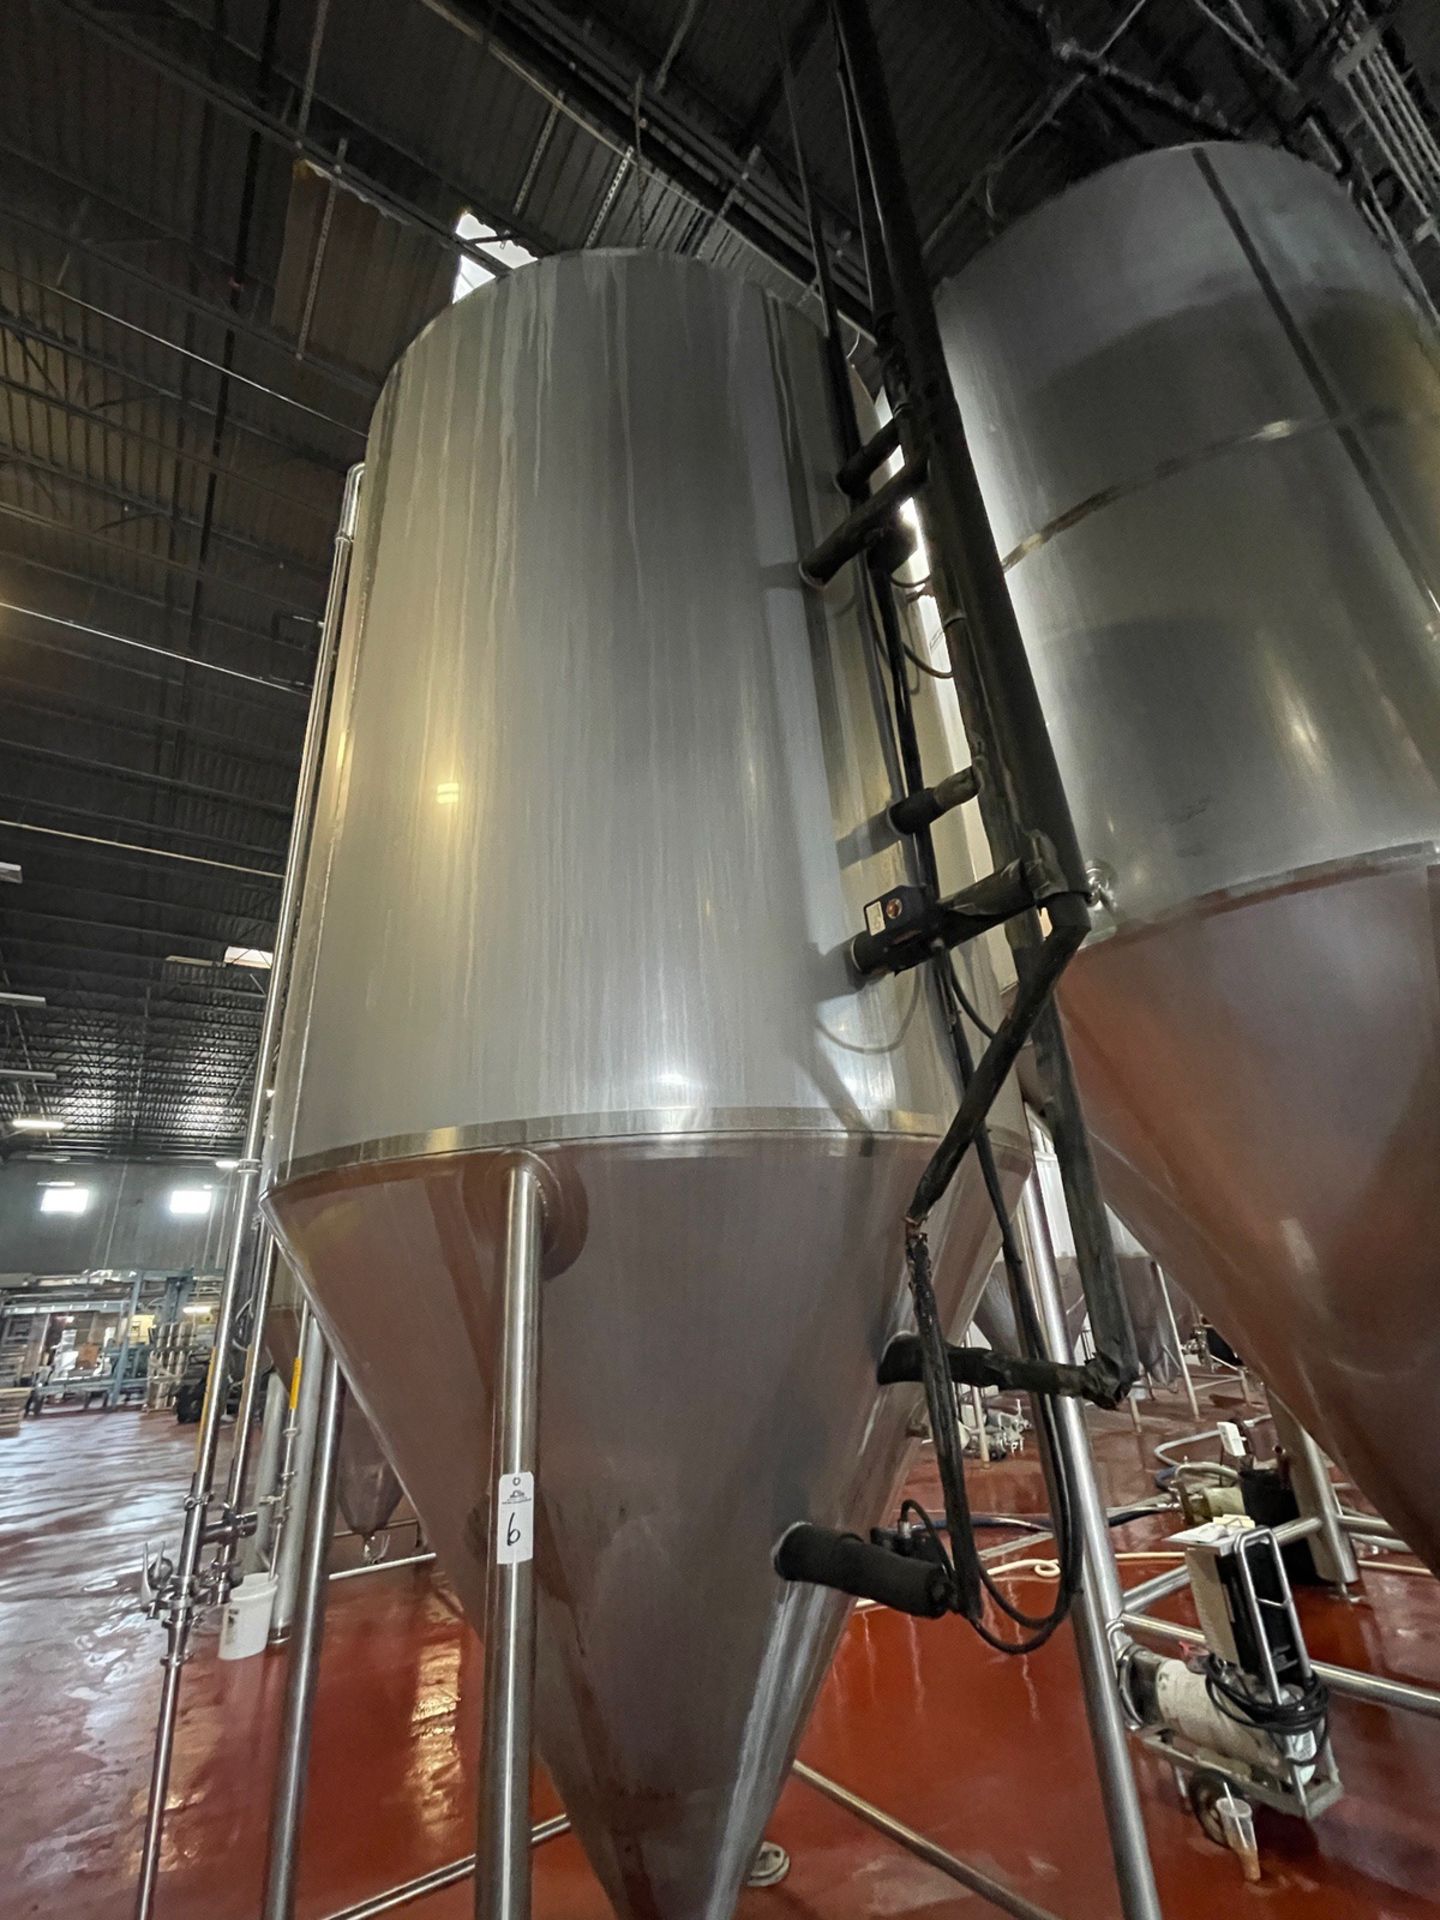 2013 Quality Tank 100 BBL Stainless Steel Fermenter, Glycol Jacketed, Cone Bottom, | Rig Fee $3000 - Image 8 of 11